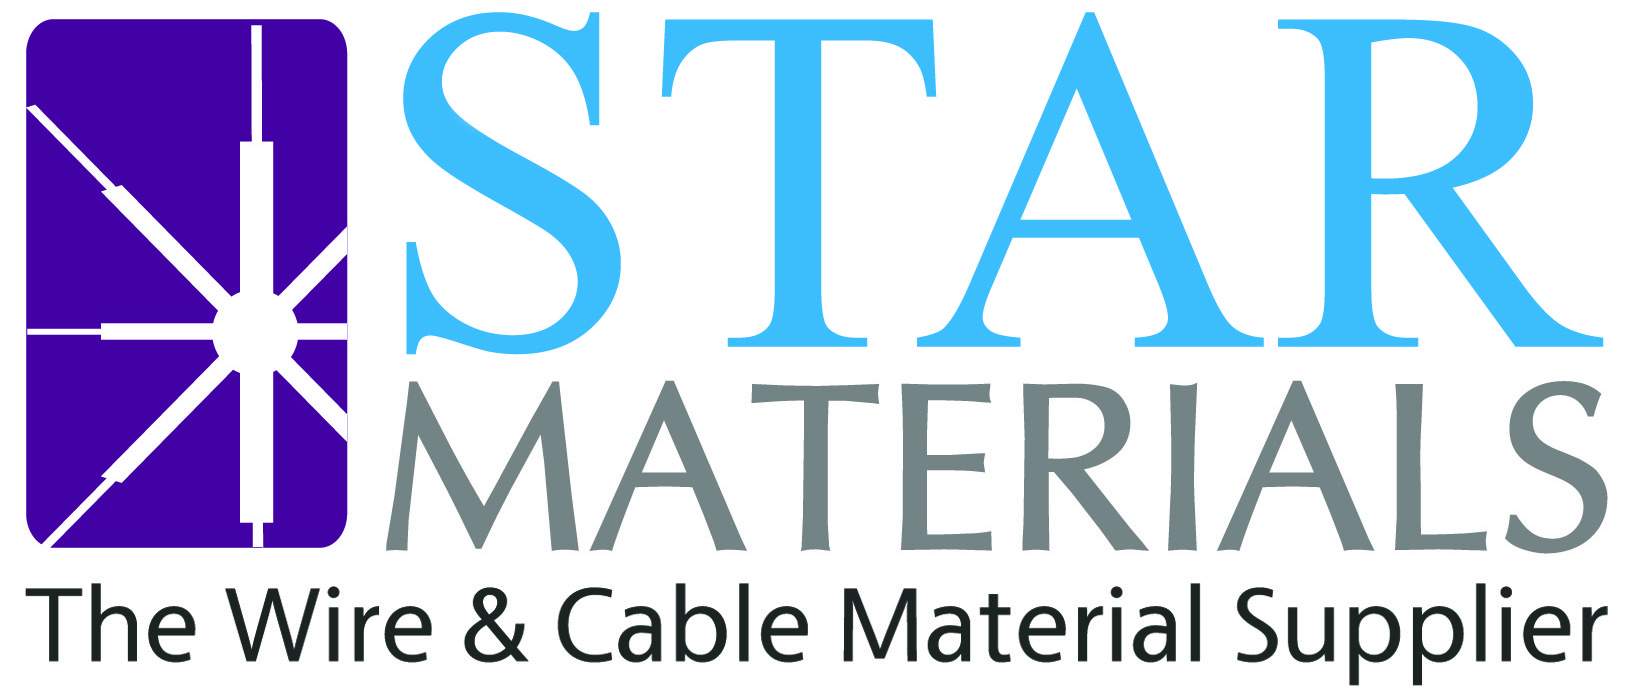 LAUNCHING STAR MATERIALS WEBSITE ON THE INTERNET